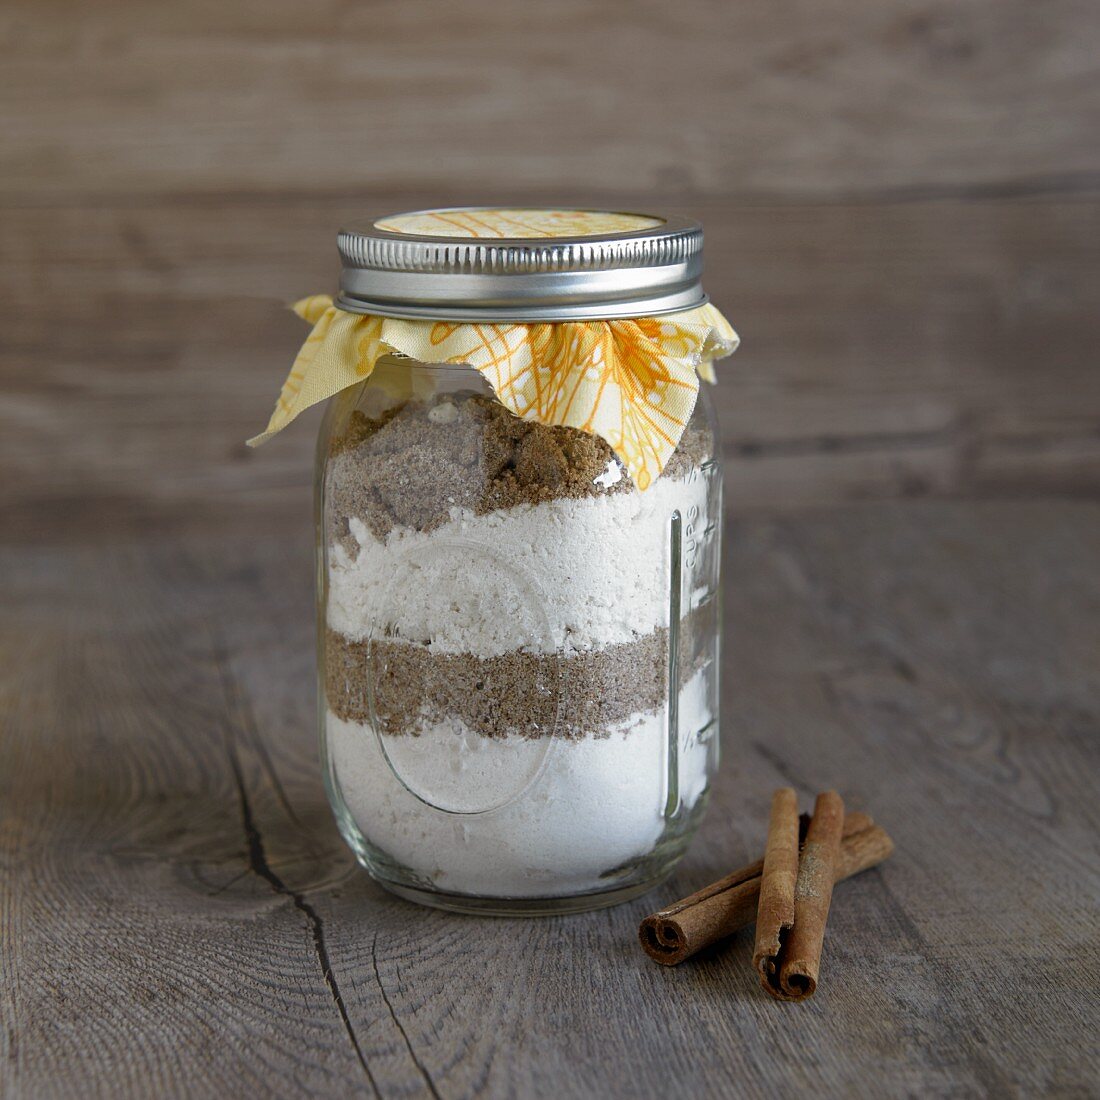 A jar containing dry ingredients for making cinnamon bread